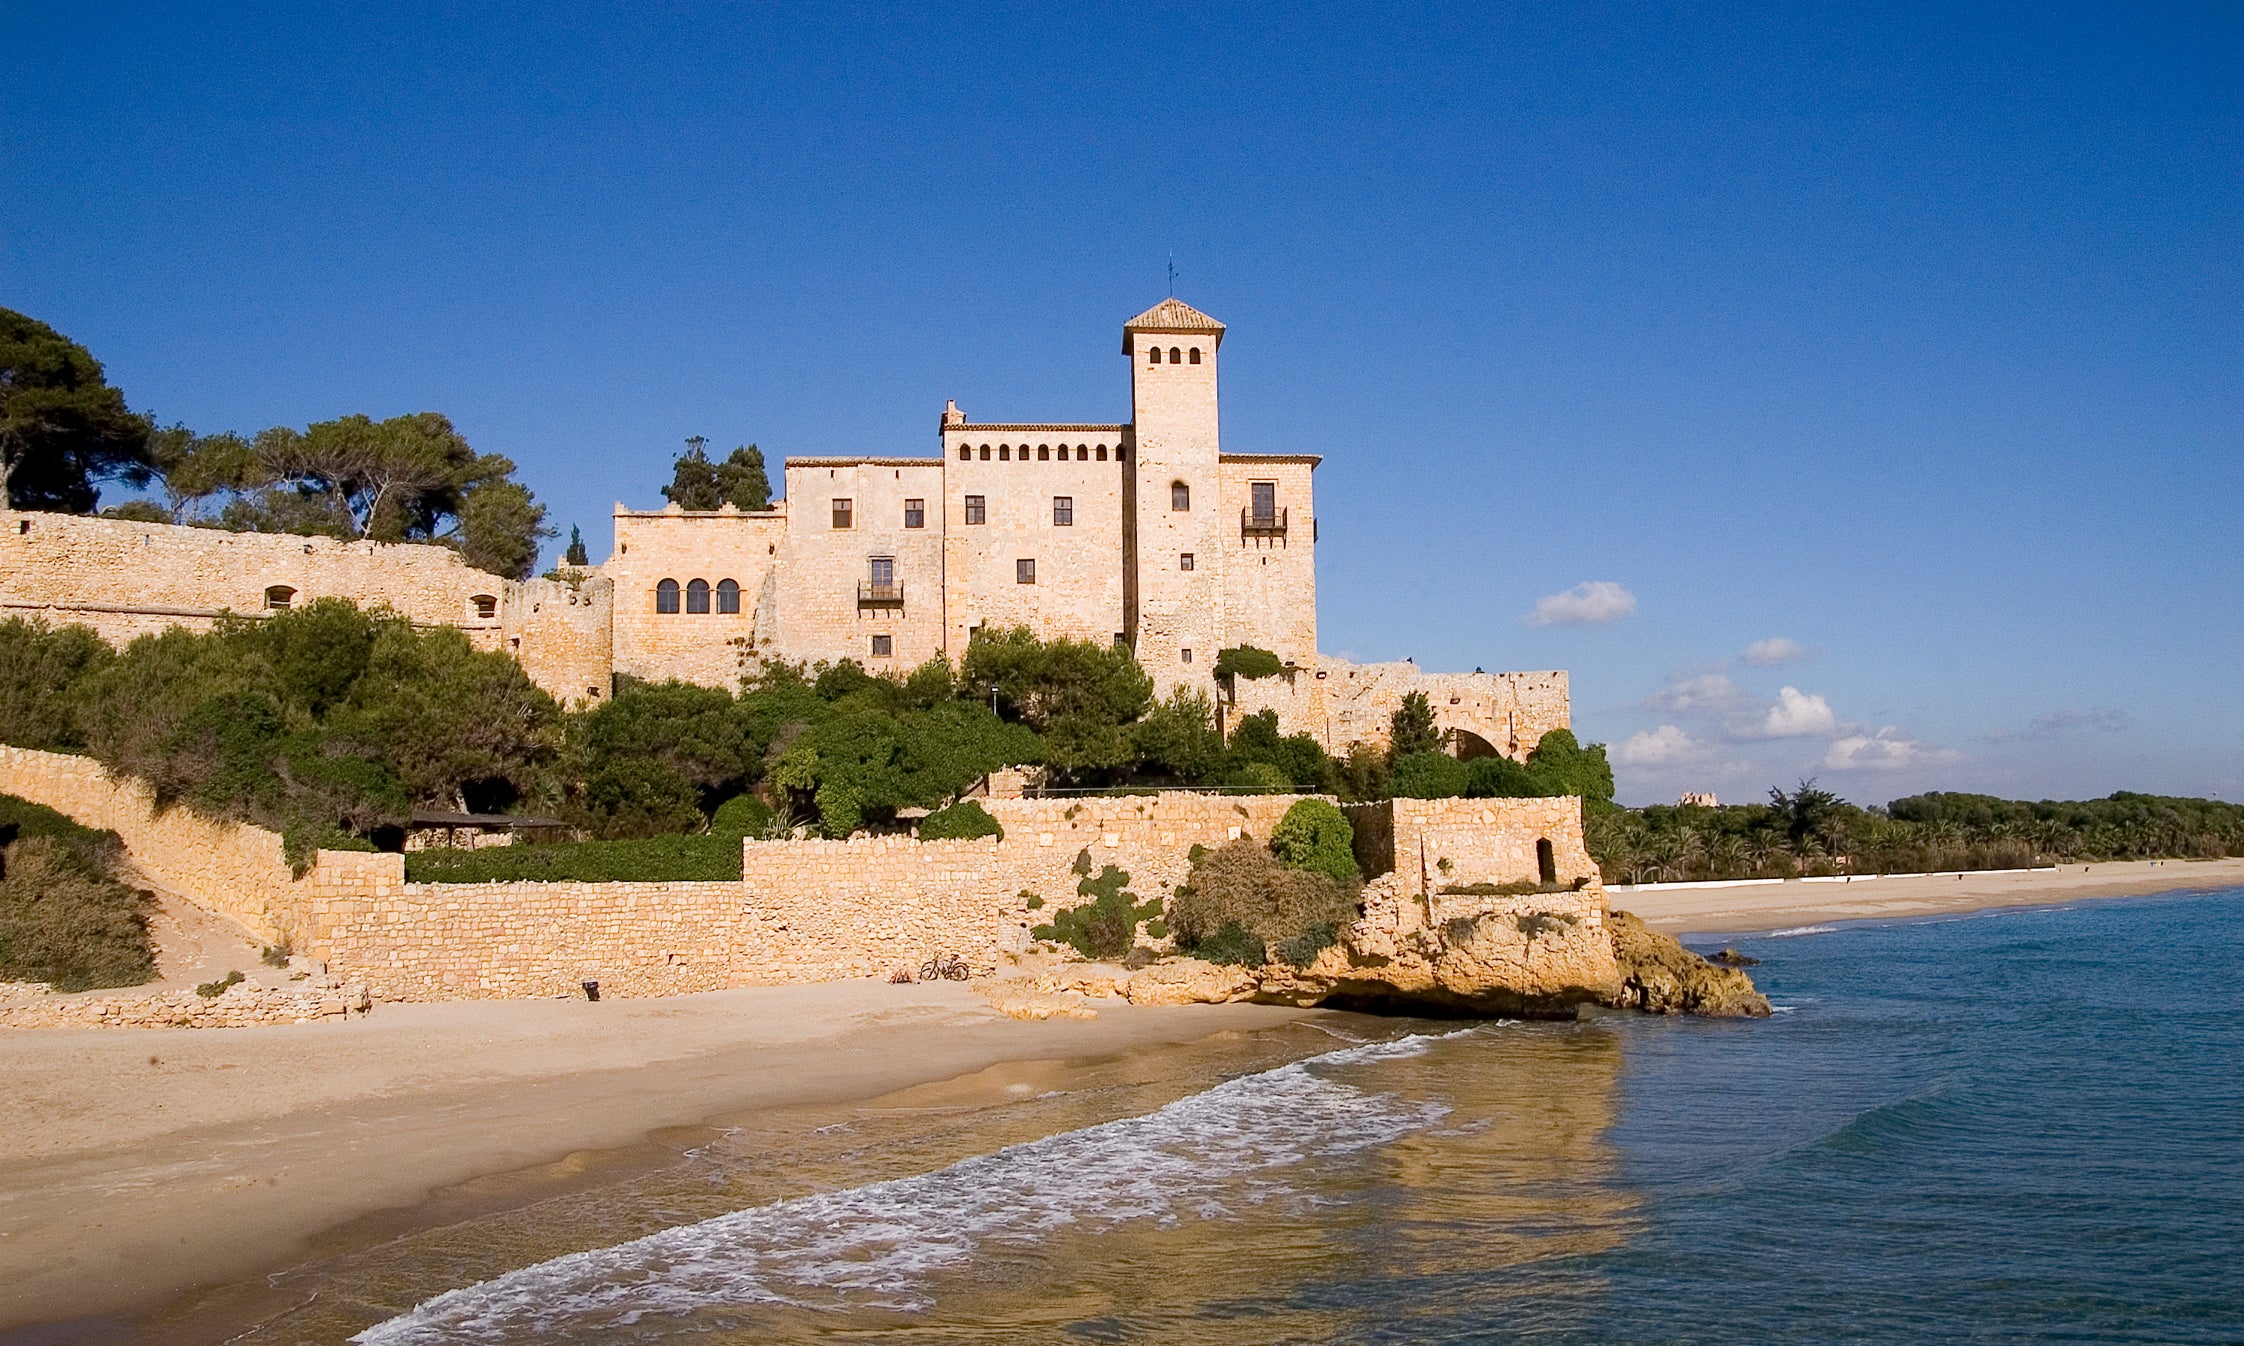 Don’t miss Tamarit Castle in Tarragona, an 11th Century fortress strategically located on a hilltop overlooking the Mediterranean